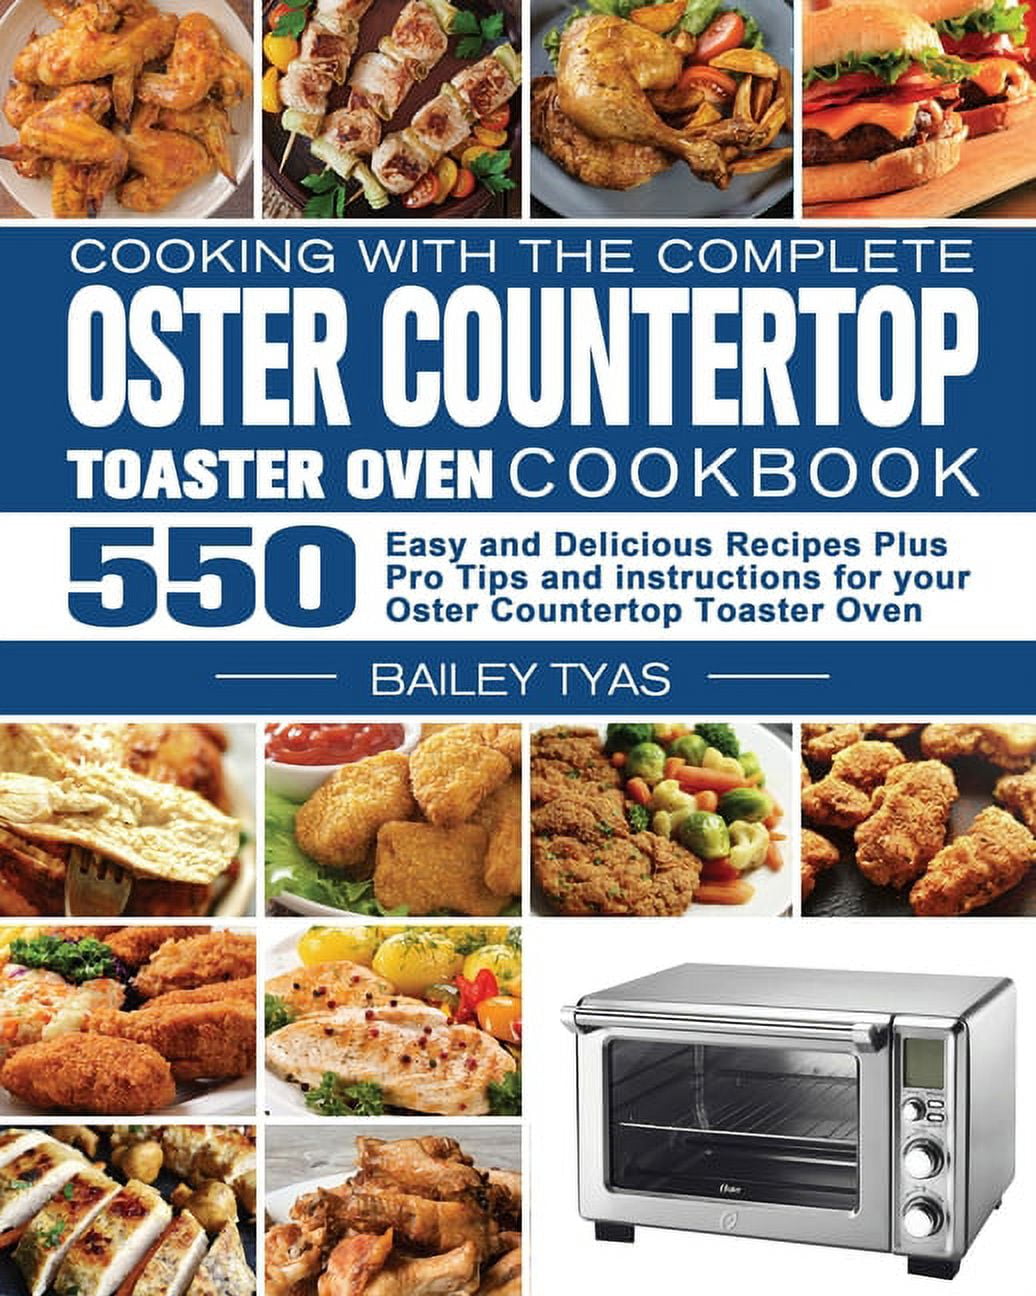 Cooking with the complete Oster Countertop Toaster Oven Cookbook  (Paperback)